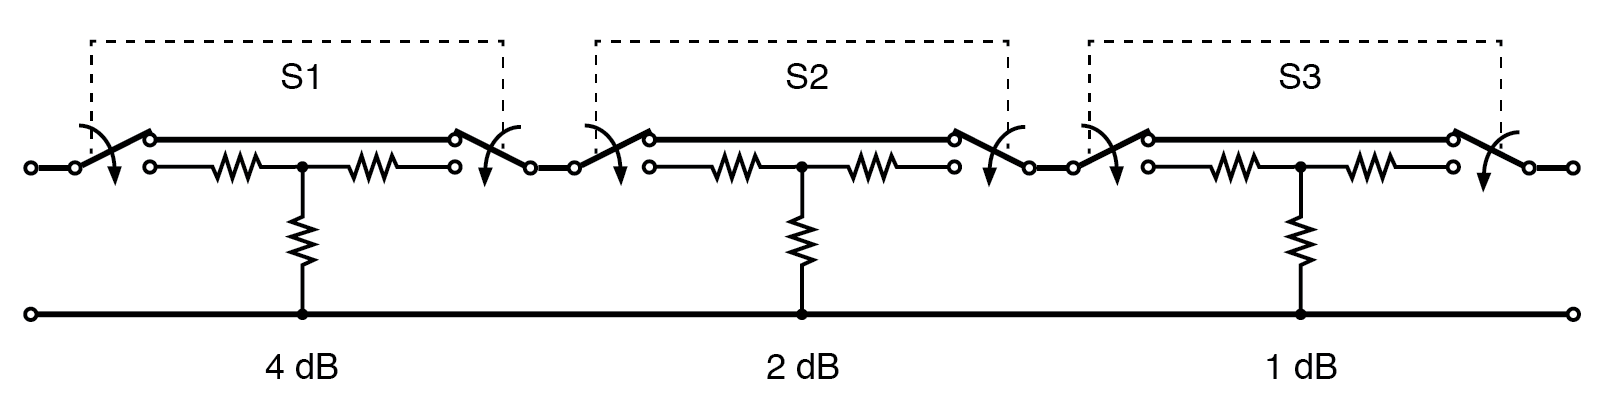 Switched attenuator: attenuation is variable in discrete steps.